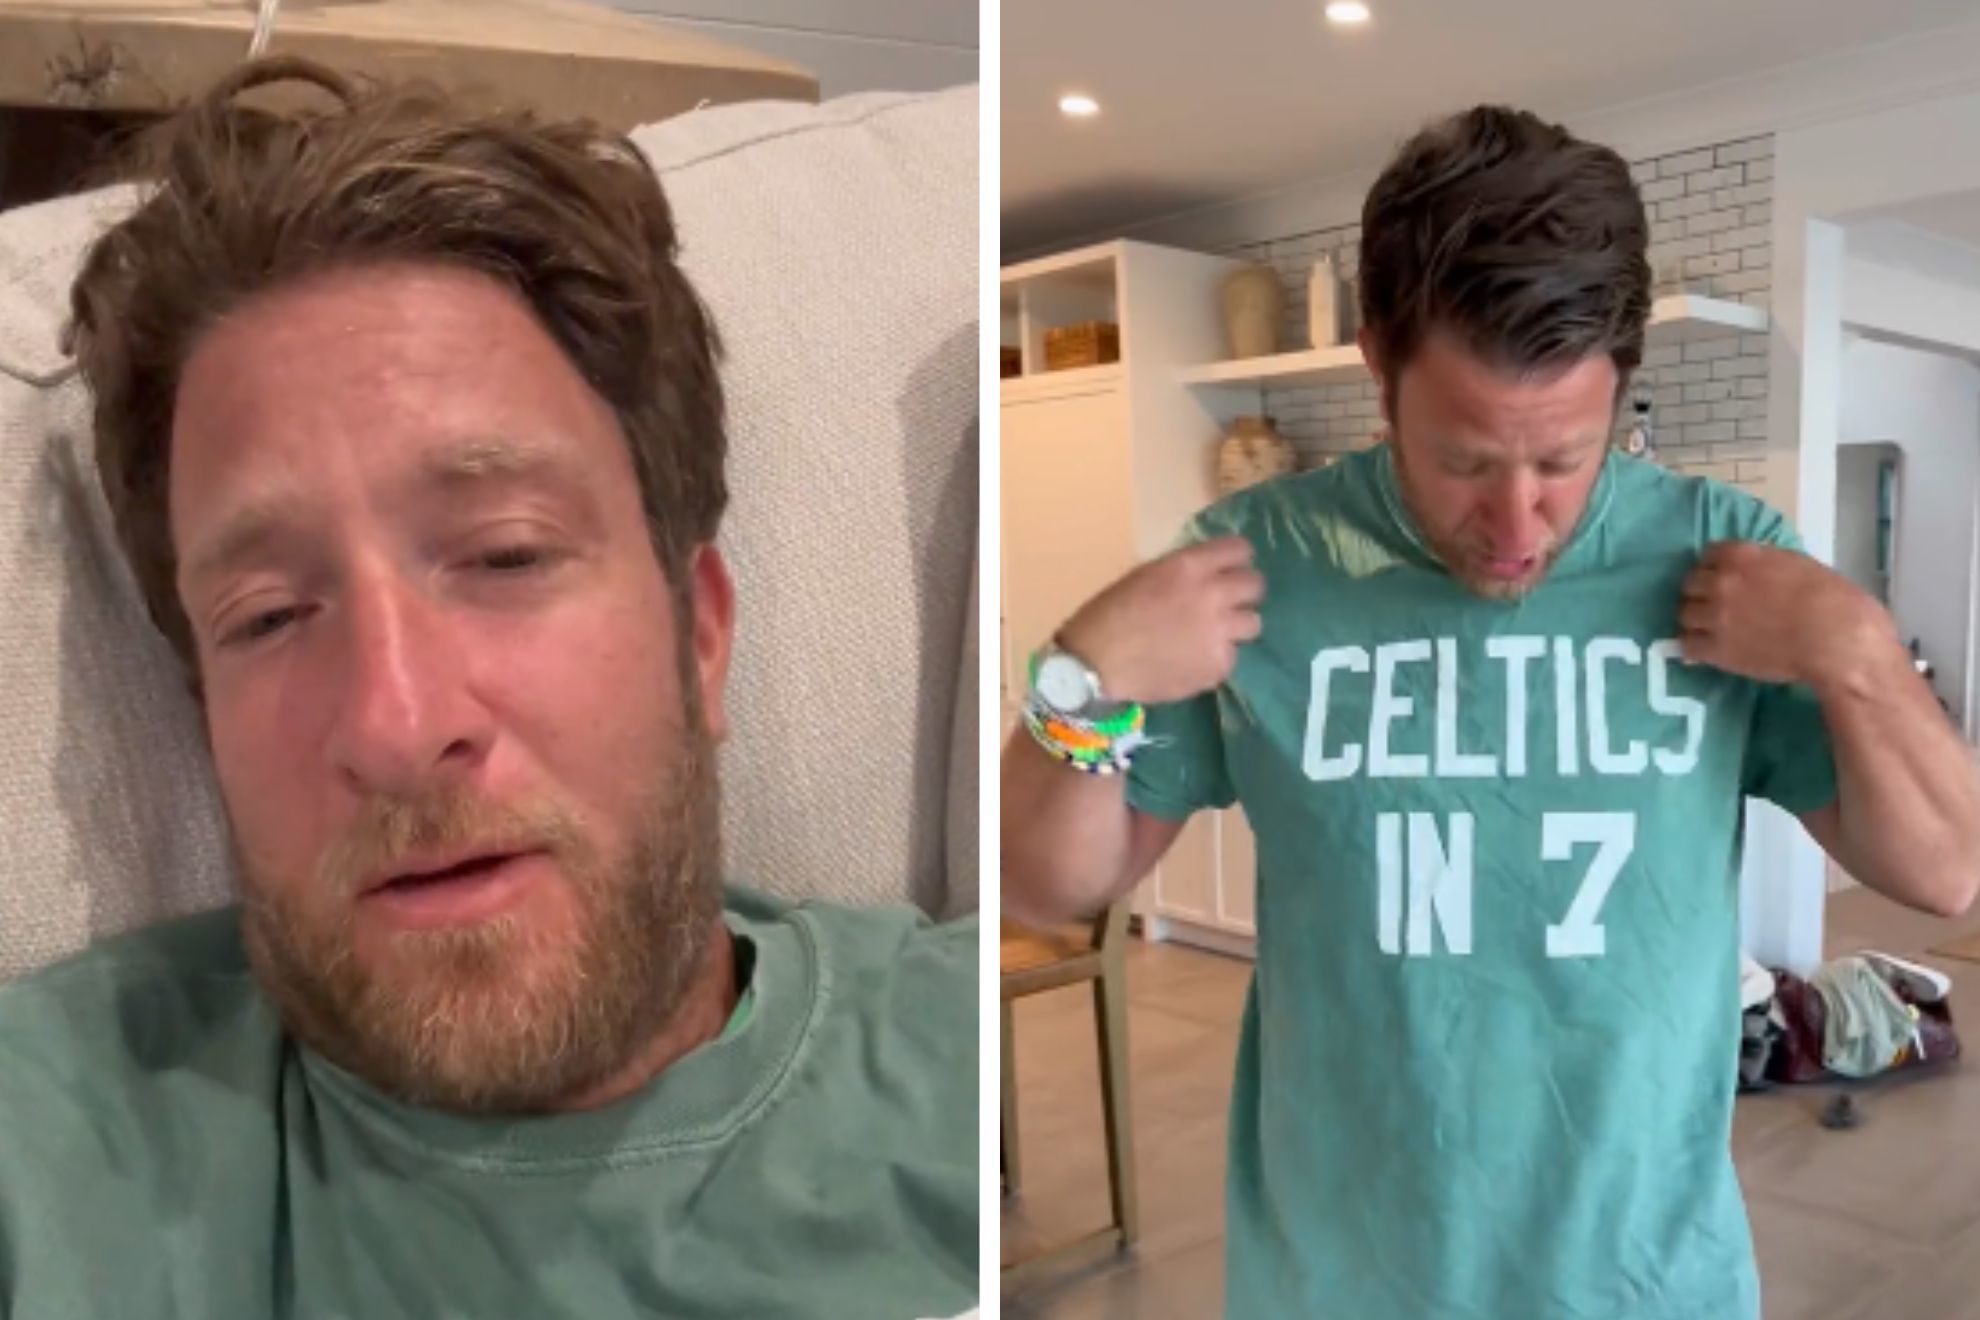 Barstool president Dave Portnoy 'on verge of dying' as his 'Celtics in 7' shirt fails